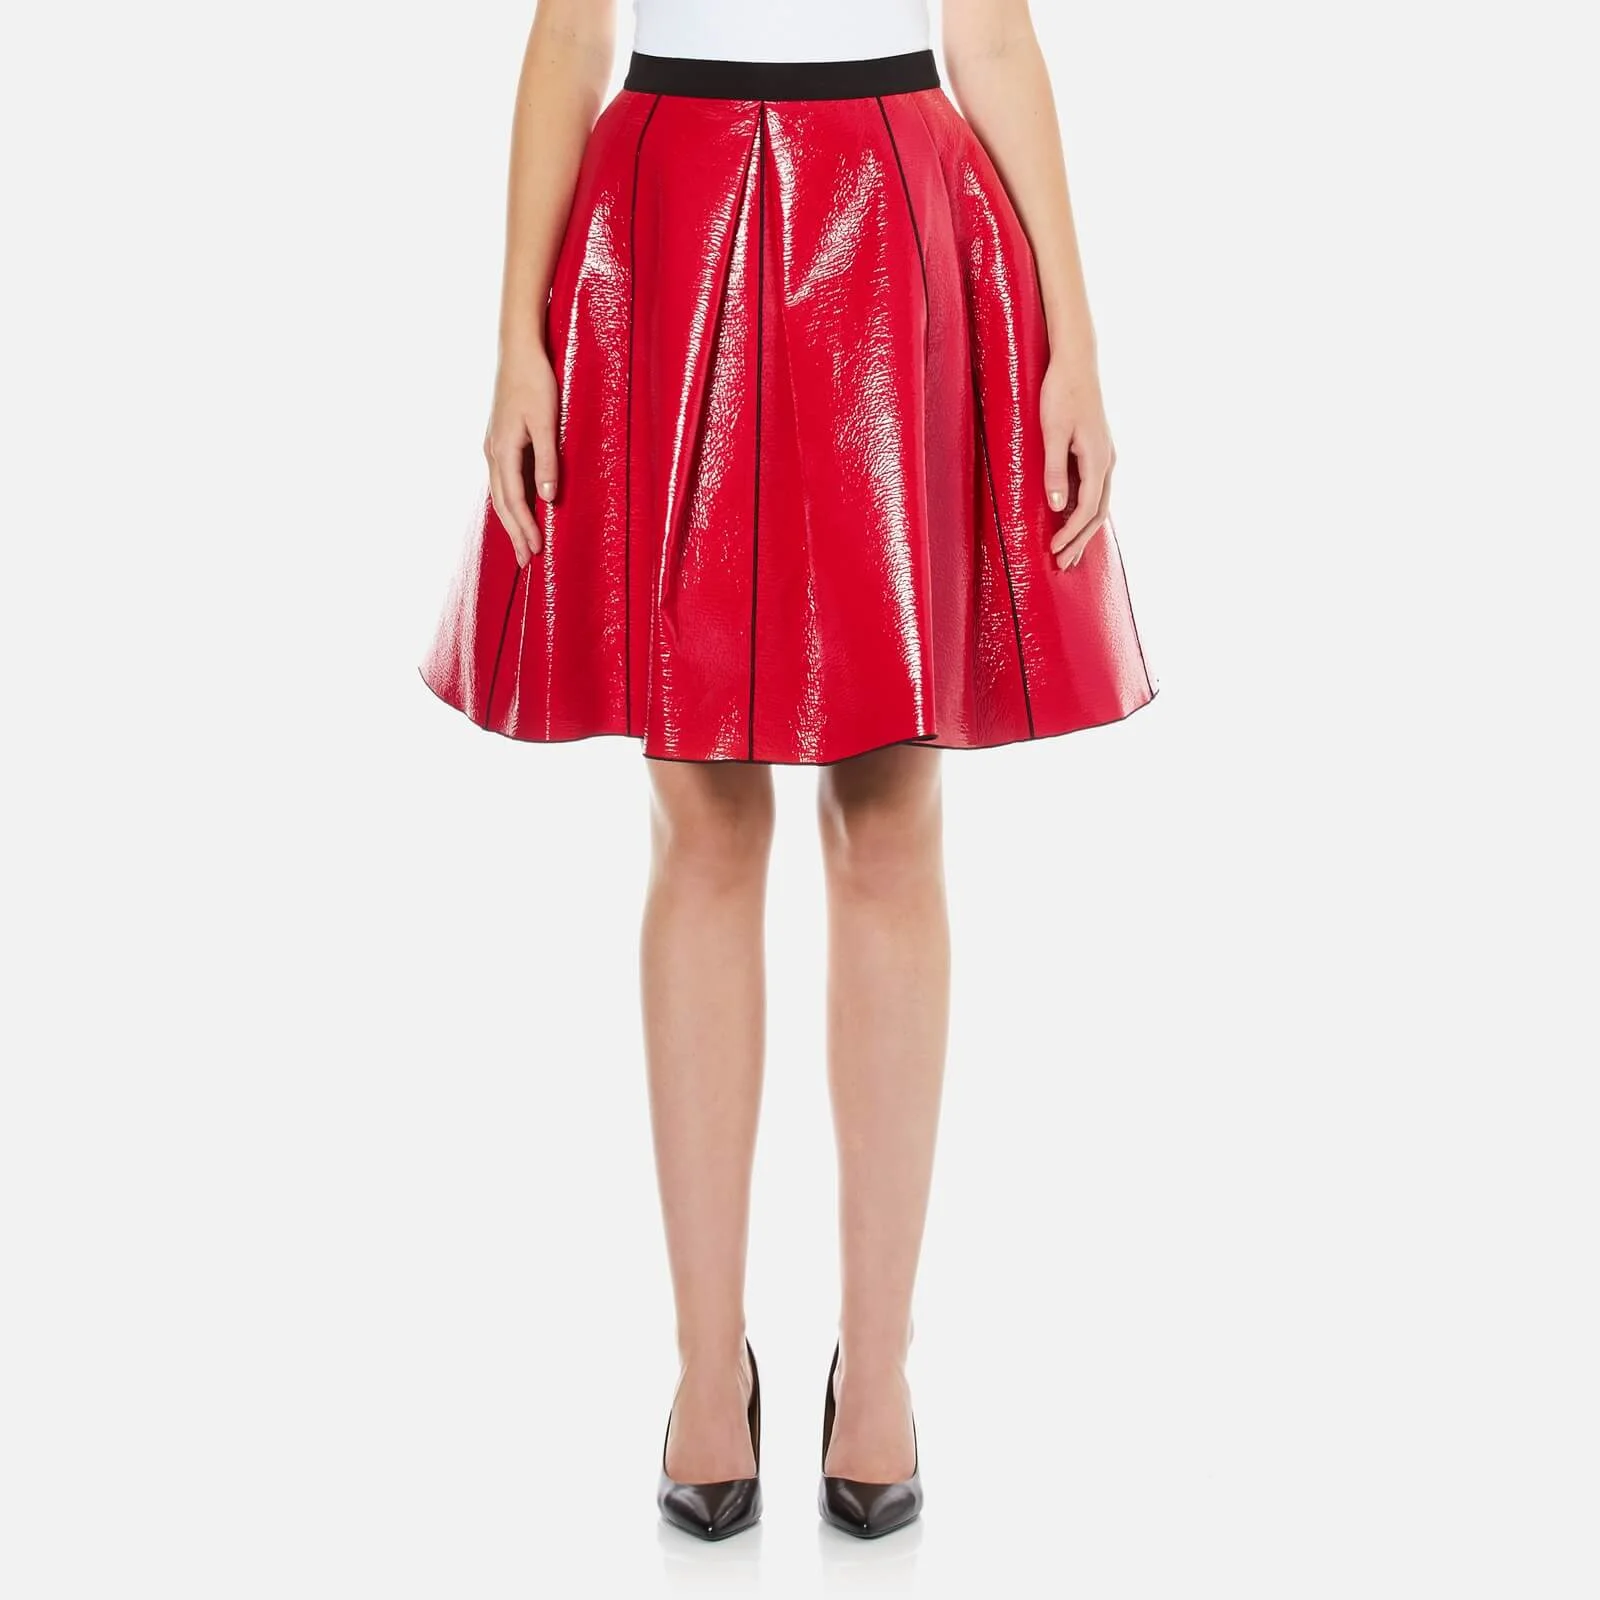 Marc Jacobs Women's Pleather Skirt with Elastic Waist - Red Image 1